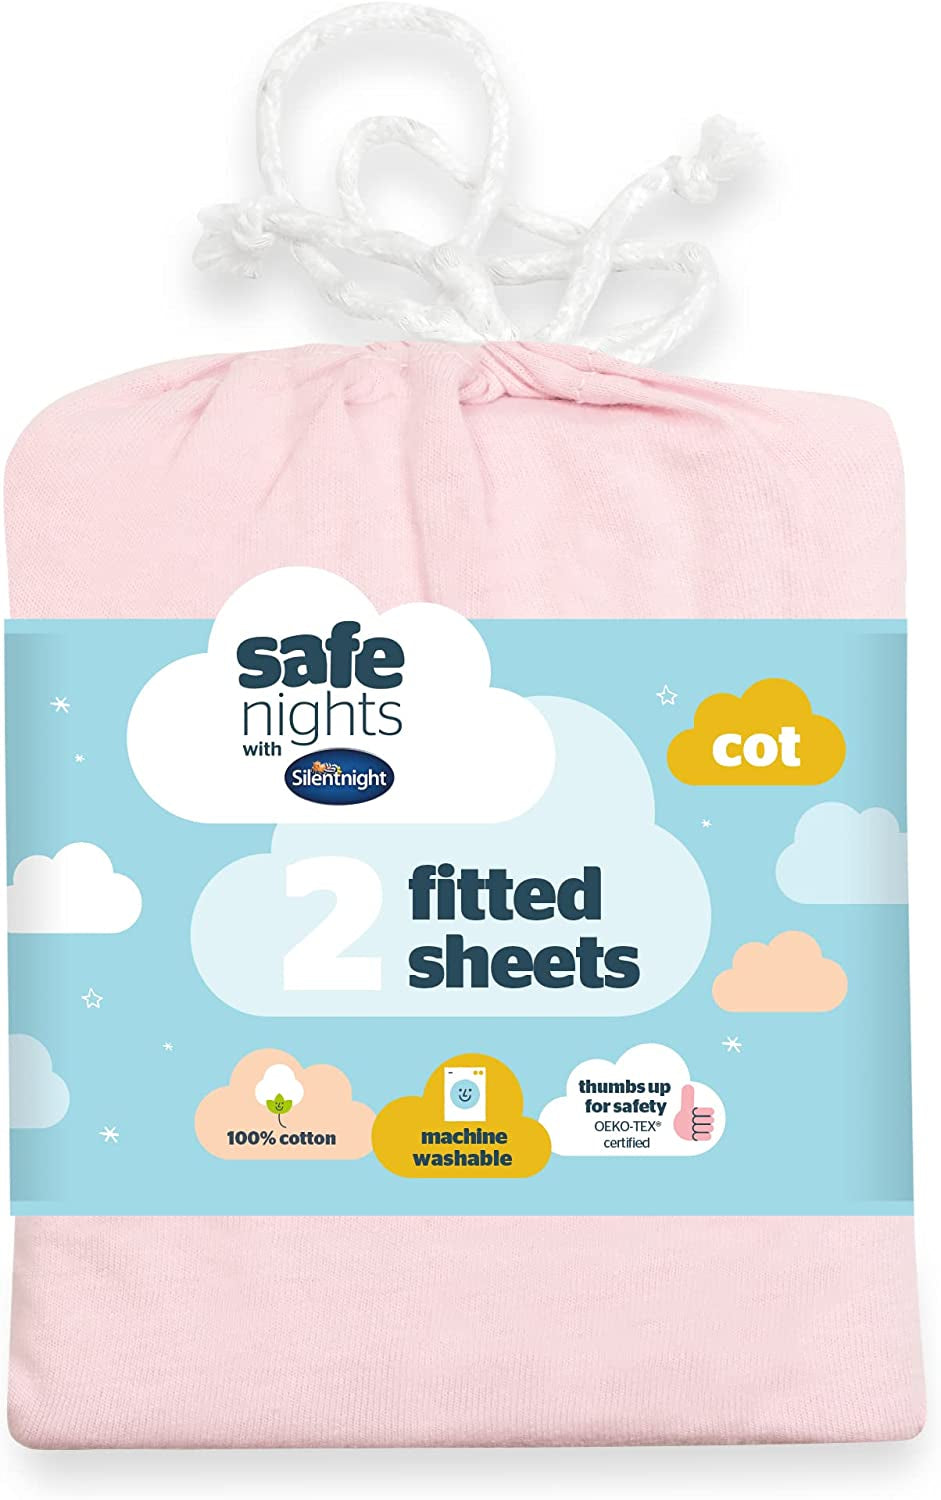 Silentnight Safe Nights Cot Bed Size Fitted Sheets Set 100% Jersey Cotton Bedside Compatible Pack of Two Grey Star easy Care Super Soft Cuddly for Baby with Storage Bag (120cm x60cm x 12cm)